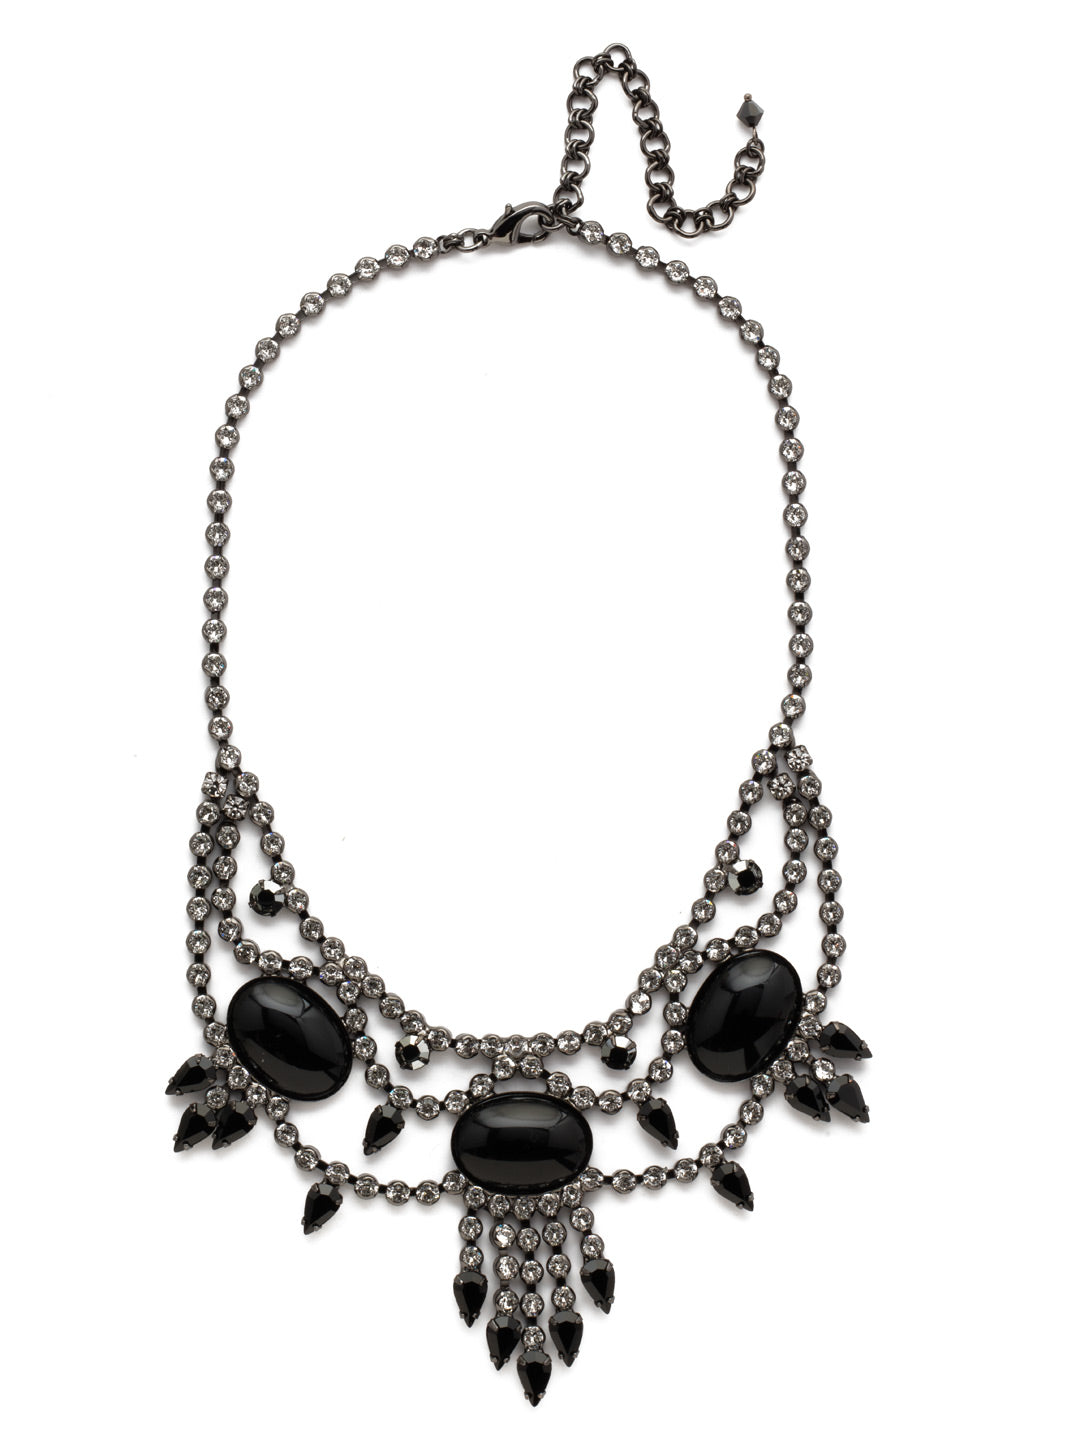 Living on the Fringe Statement Necklace - NCQ19GMMMO - Other pieces are envious of the uniqueness this necklace brings. Gems fringe out from the bottom, giving this statement an extra shot of pizzazz. The chain is covered in sparkle, leaving no room for anything but shine... and you, of course. From Sorrelli's Midnight Moon collection in our Gun Metal finish.